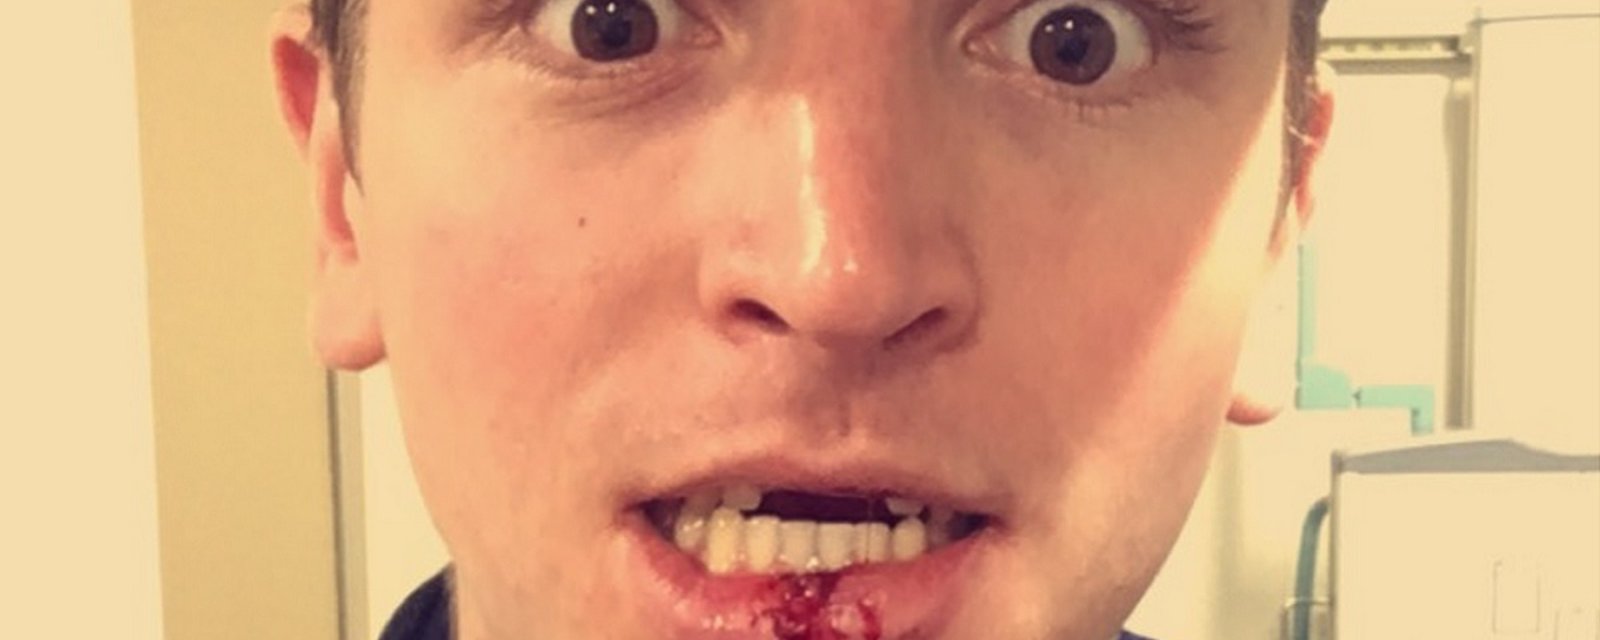 Jimmy Vesey loses his two front teeth, and finds them in a very painful location.